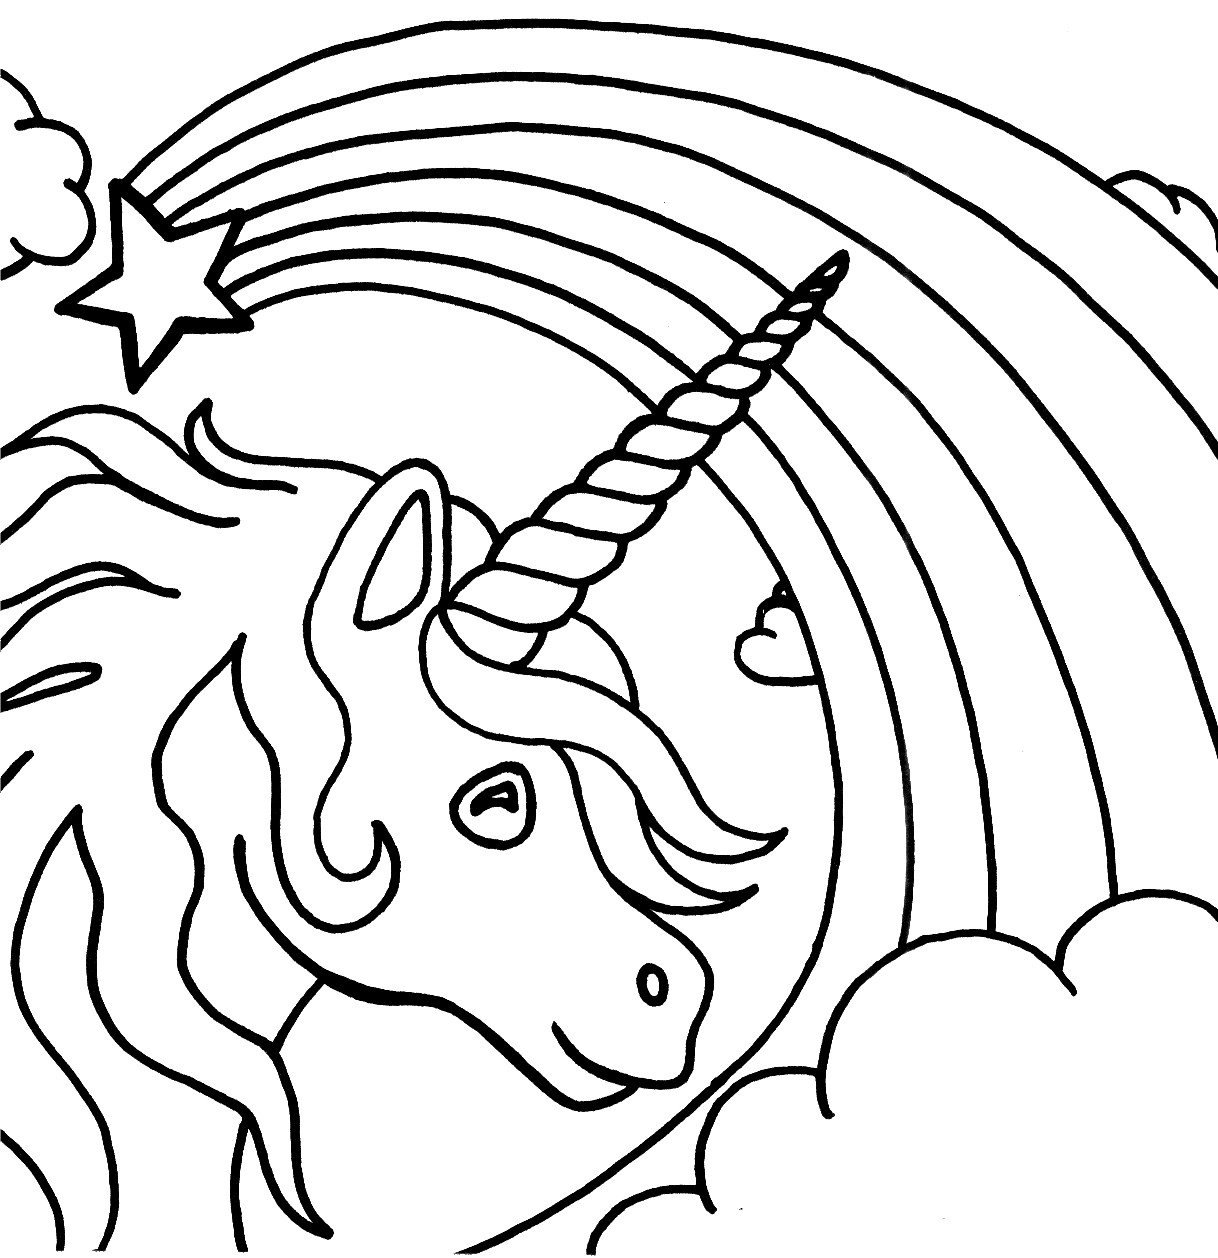 Printable Coloring Pages Unicorn
 Free Printable Unicorn Coloring Pages For Kids